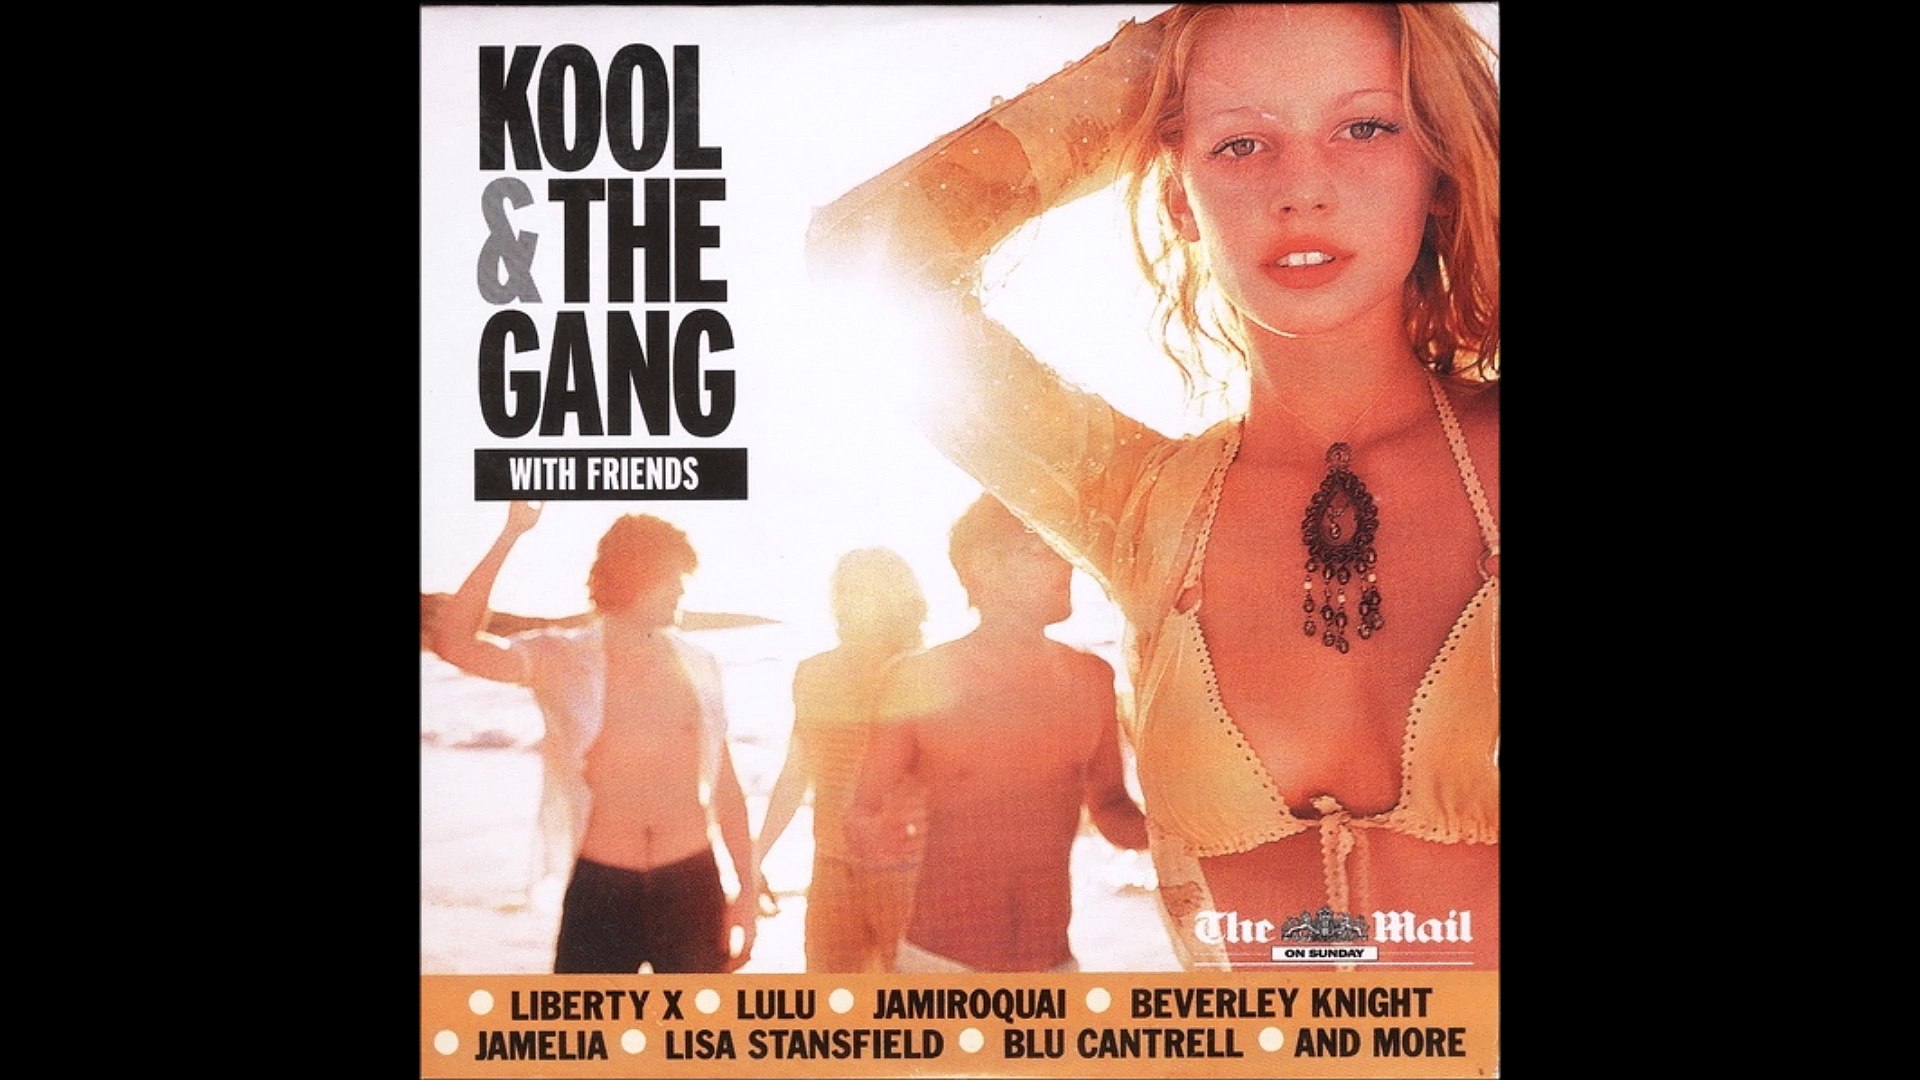 Kool & The Gang feat Lisa Stansfield - Too Hot - Video Dailymotion